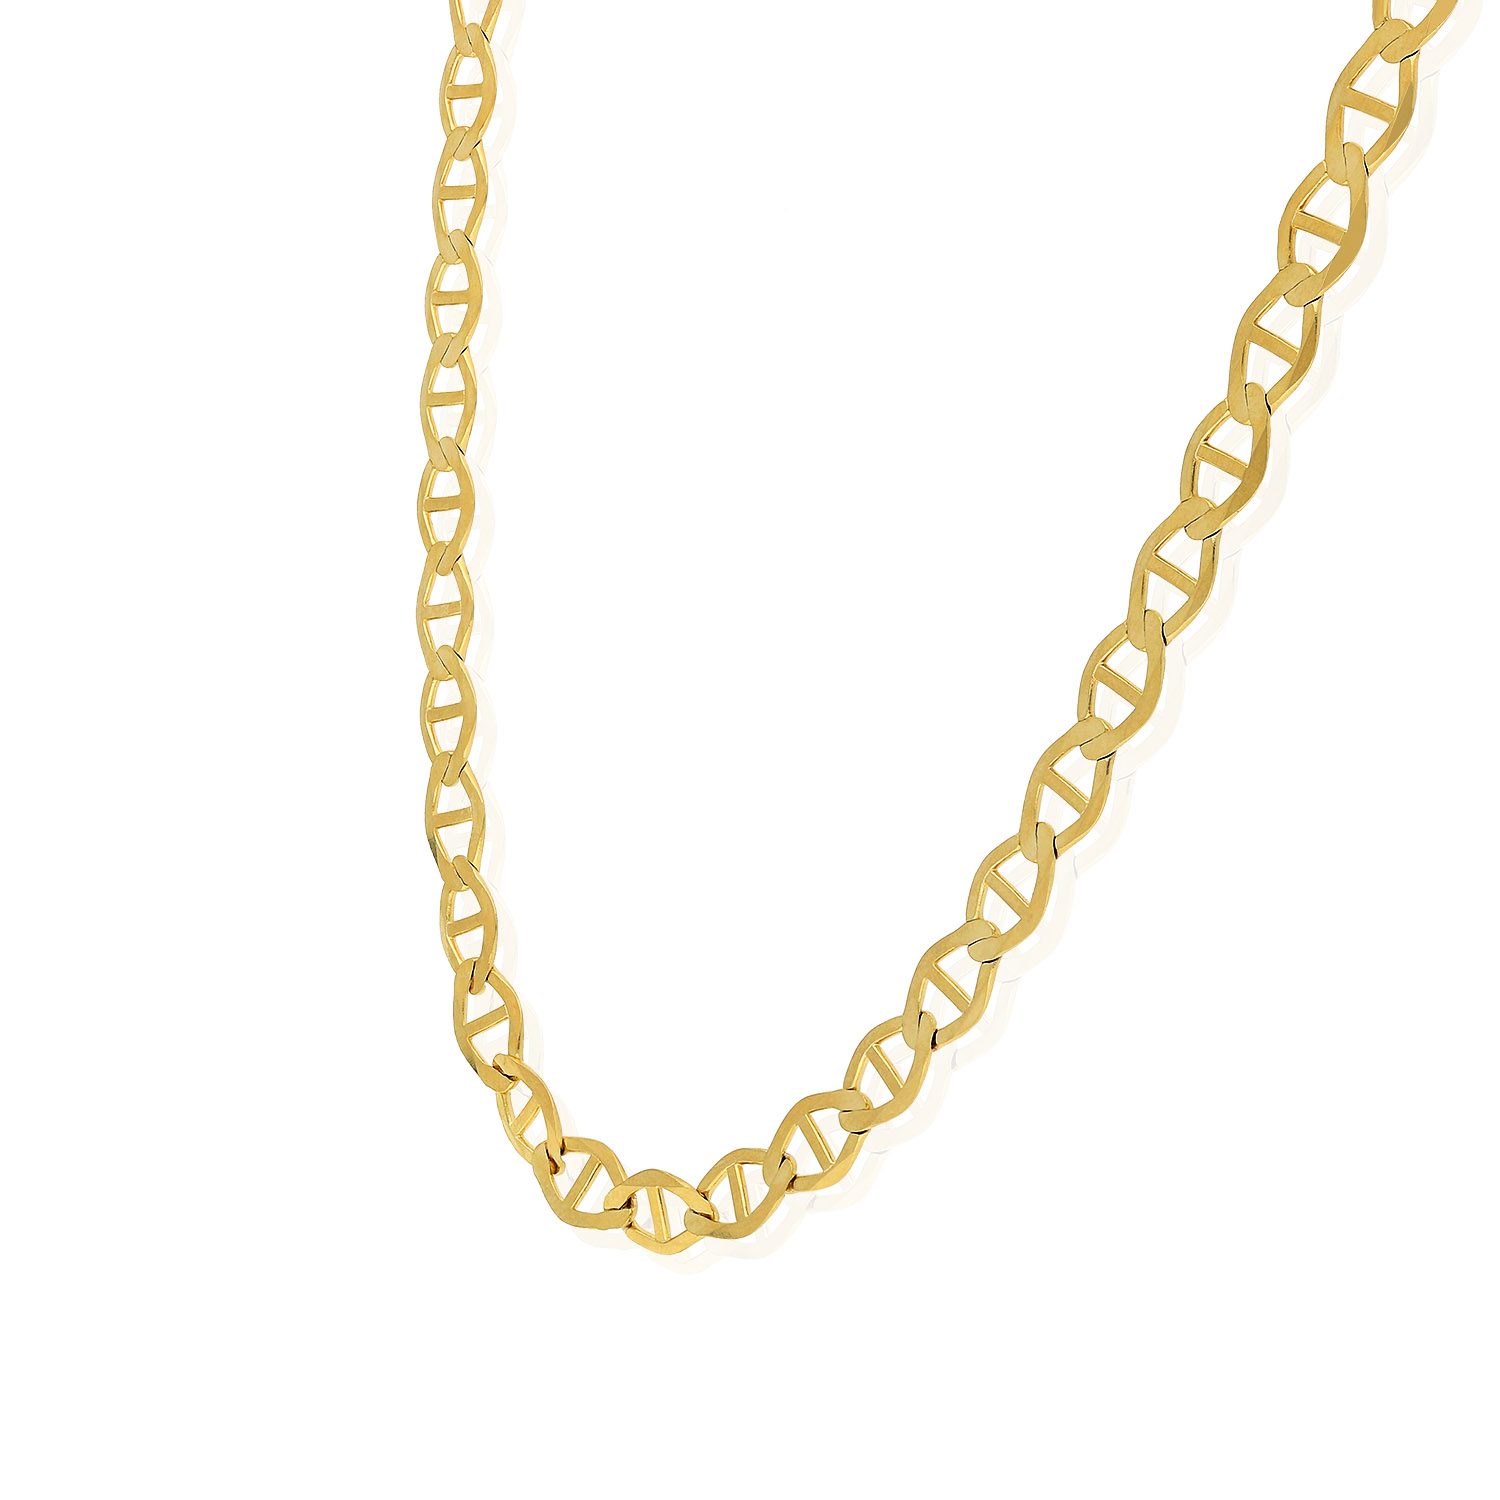 Solid 14K Yellow Gold Mariner Link Chain Flat Mariner Chain 